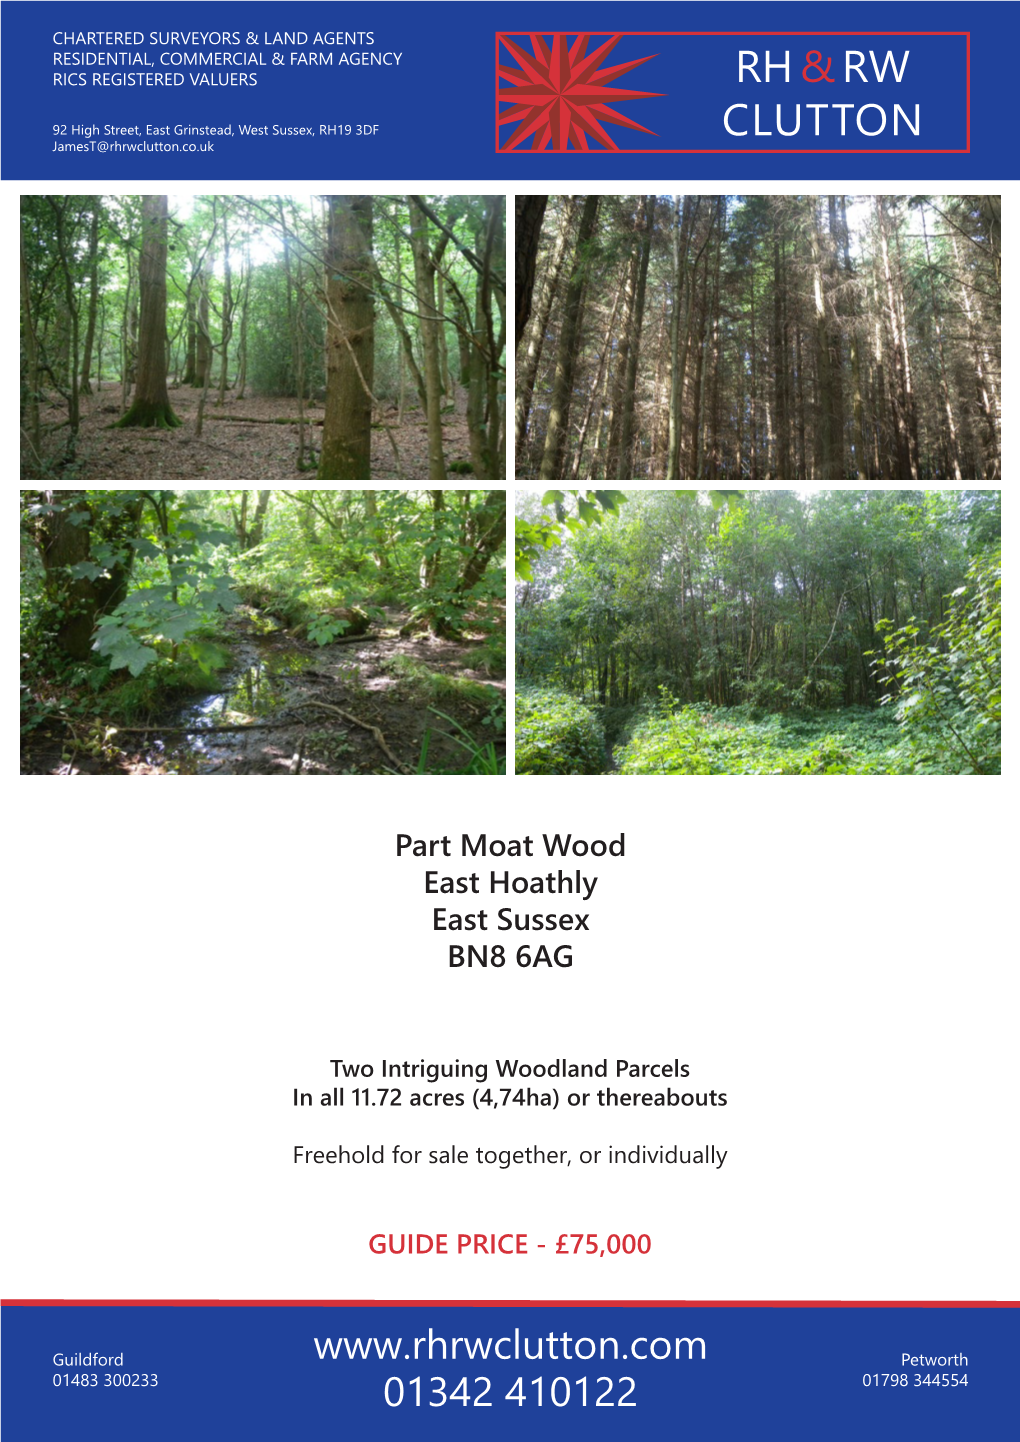 Part Moat Wood East Hoathly East Sussex BN8 6AG